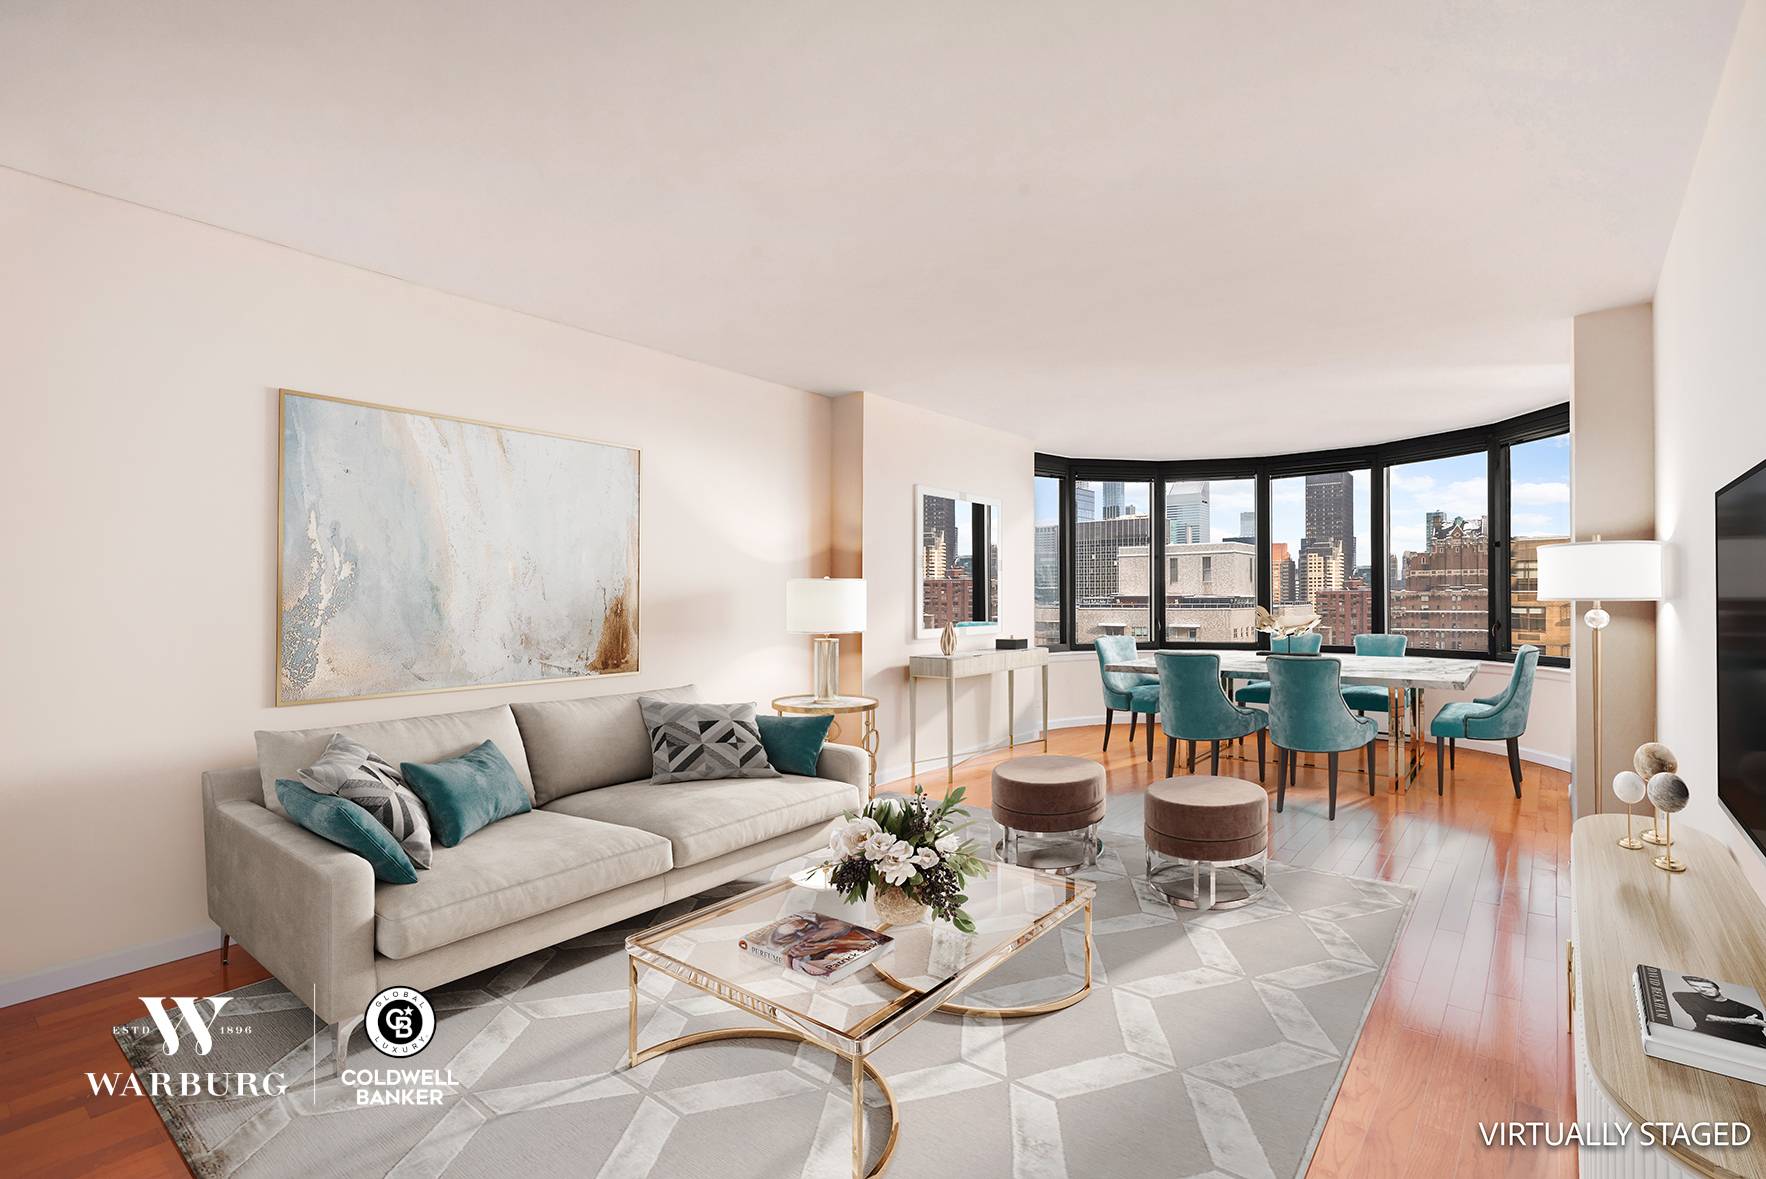 A wonderful opportunity to enjoy a high floor rental at the Corinthian one of New York's premiere condo buildings.